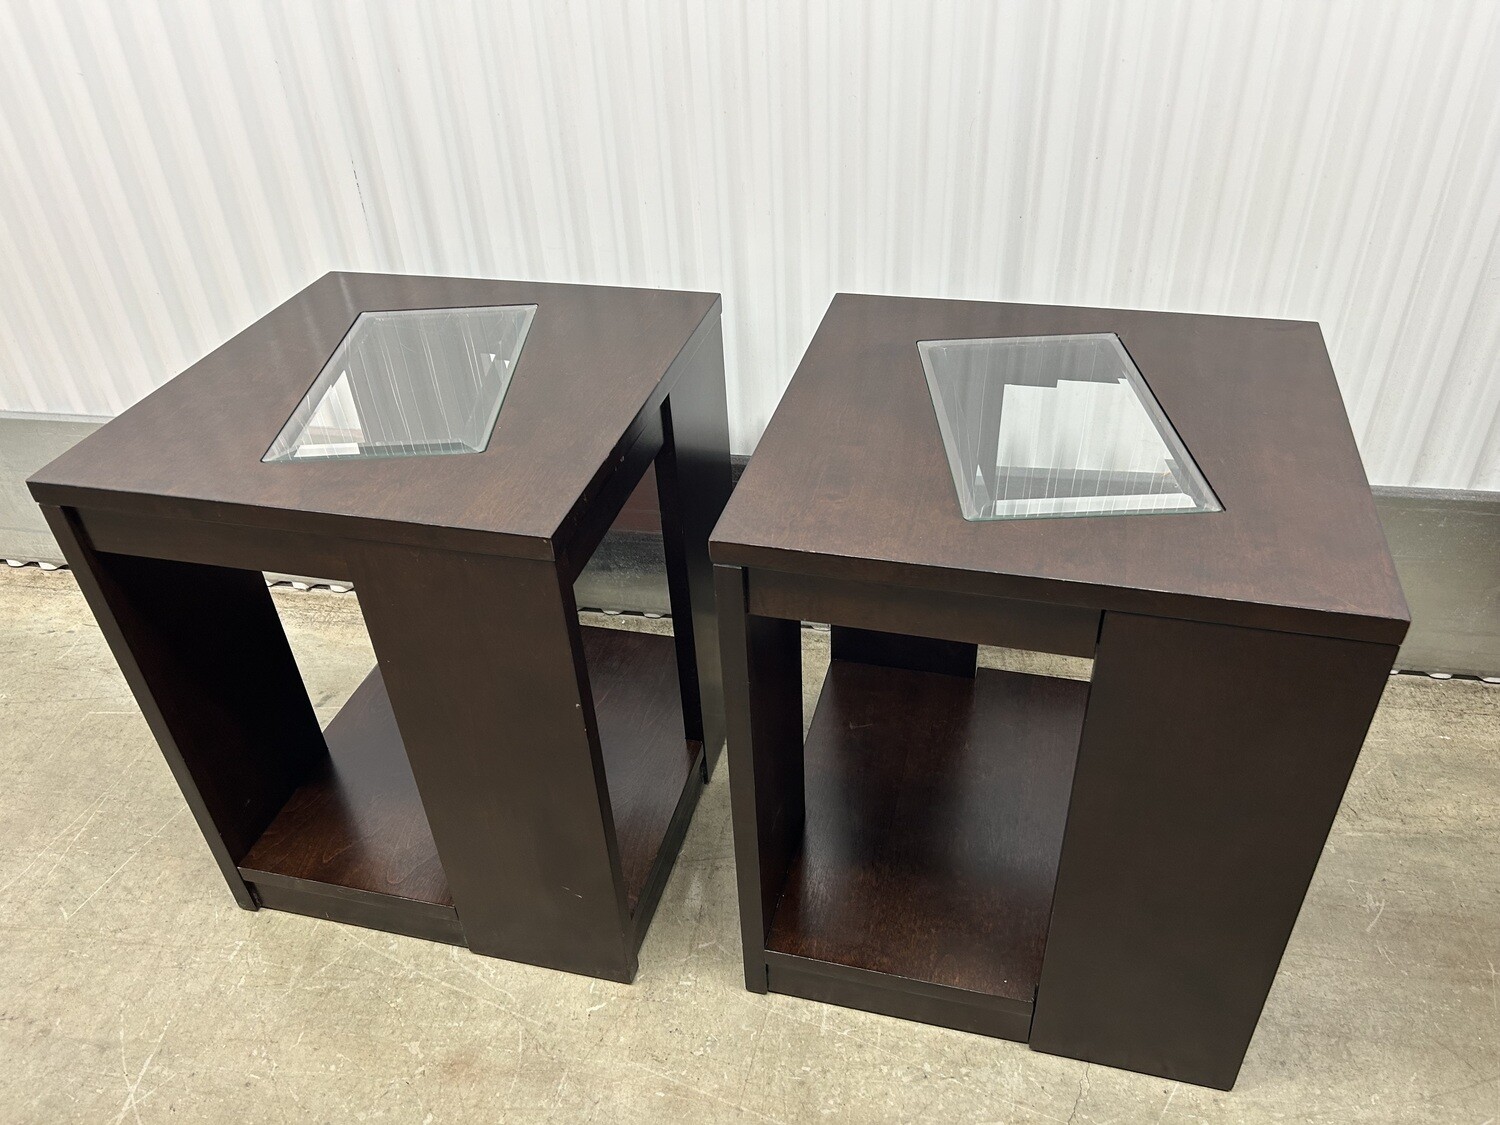 Pair: Cube-shape End Tables, glass insert #2114